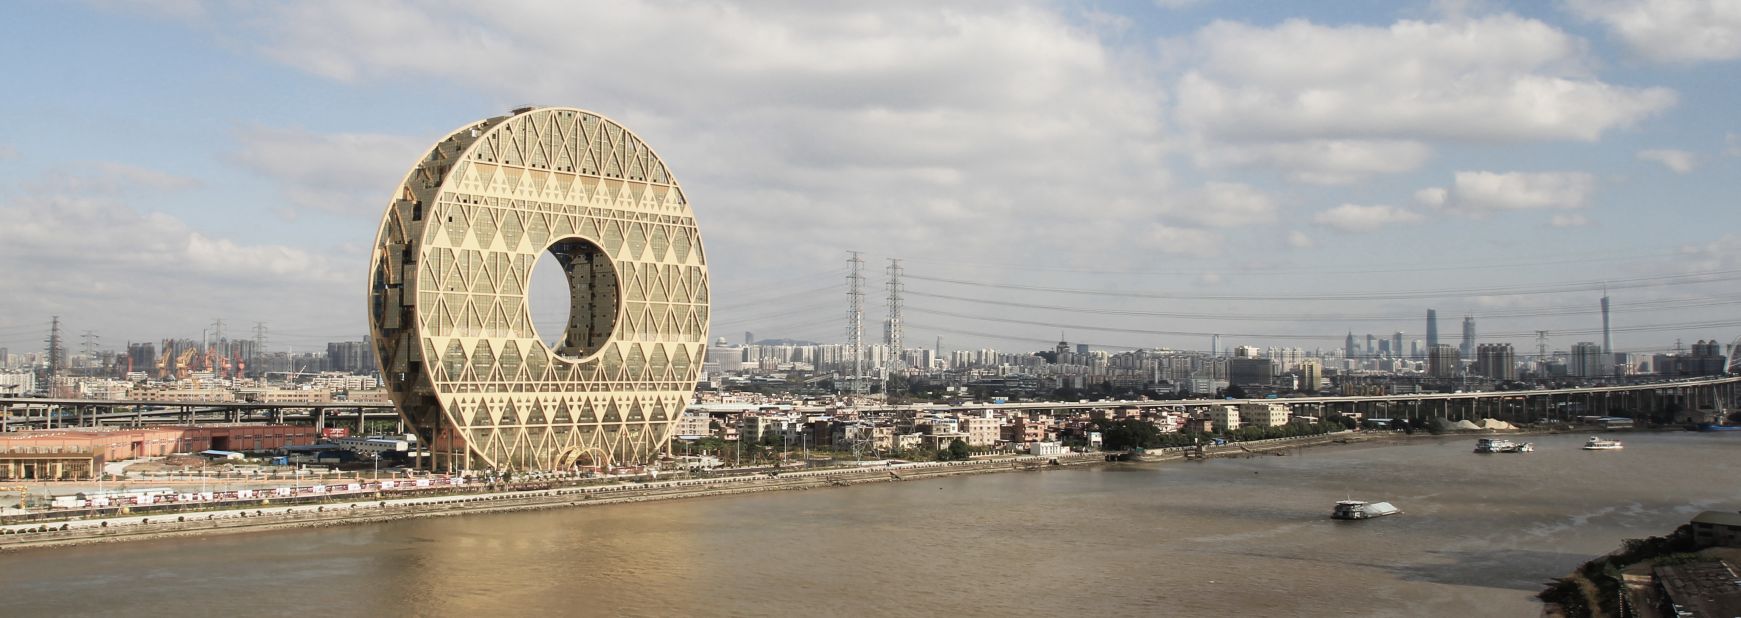 Memorable architectural designs, already built in China, include the Guangzhou Circle, home to the Guangdong Plastic Exchange. According to Italian architecture firm A.M. Progetti, the design is inspired by ancient jade discs.